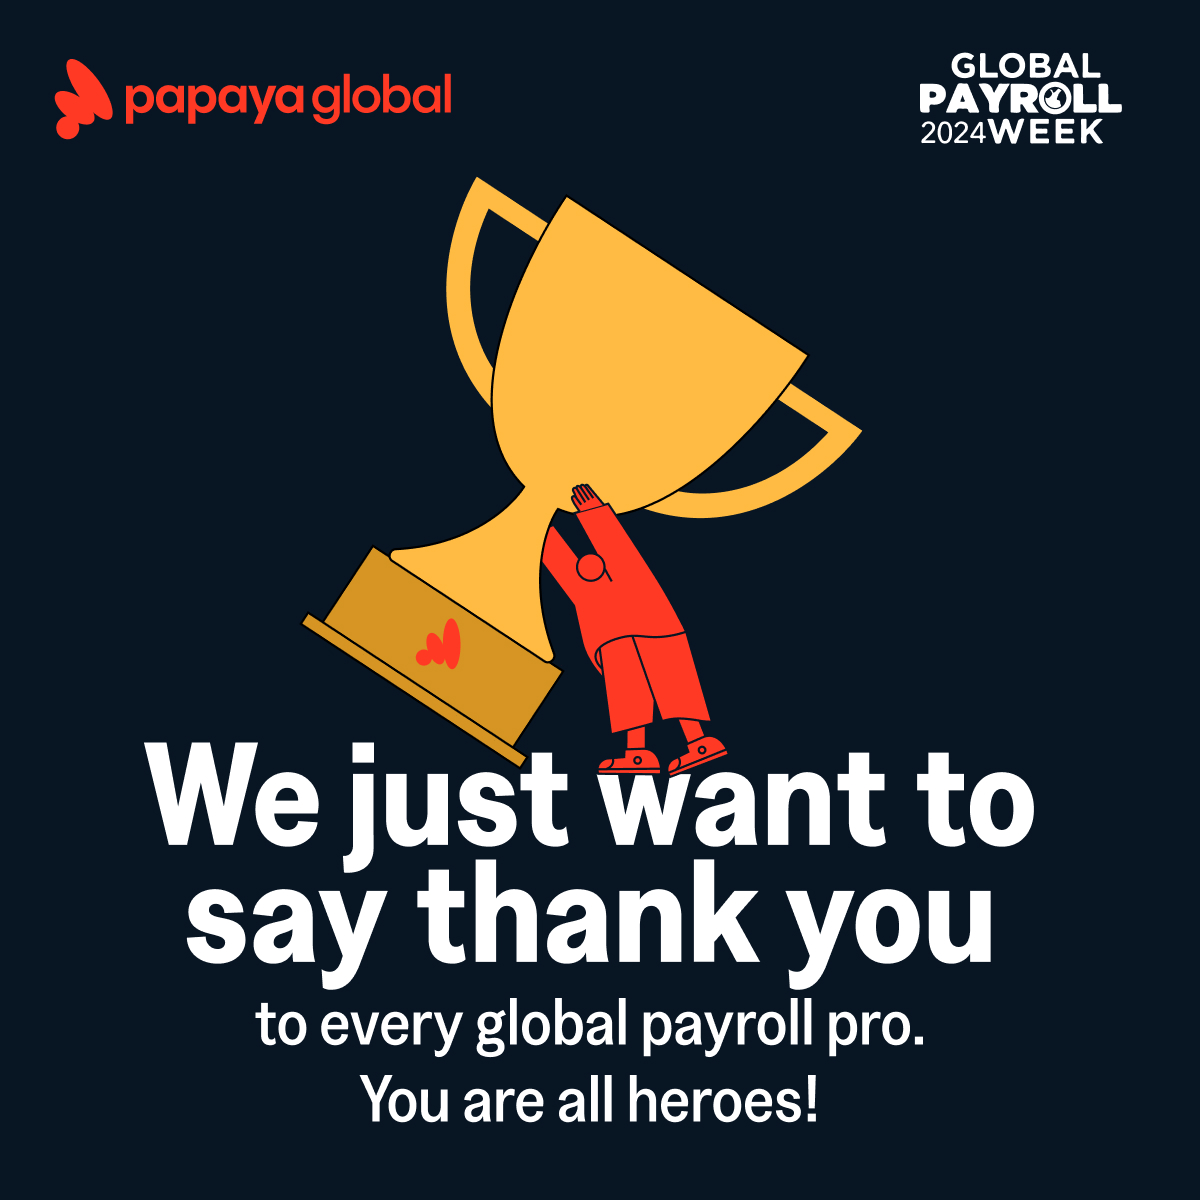 Thank you to every global payroll pro. You are all heroes 🦸 At Papaya, we celebrate Global Payroll Week every week. It's our mission and privilege to work in this dynamic industry. Here’s to many years of transforming global payroll together.  #payroll #payments #globalpayweek